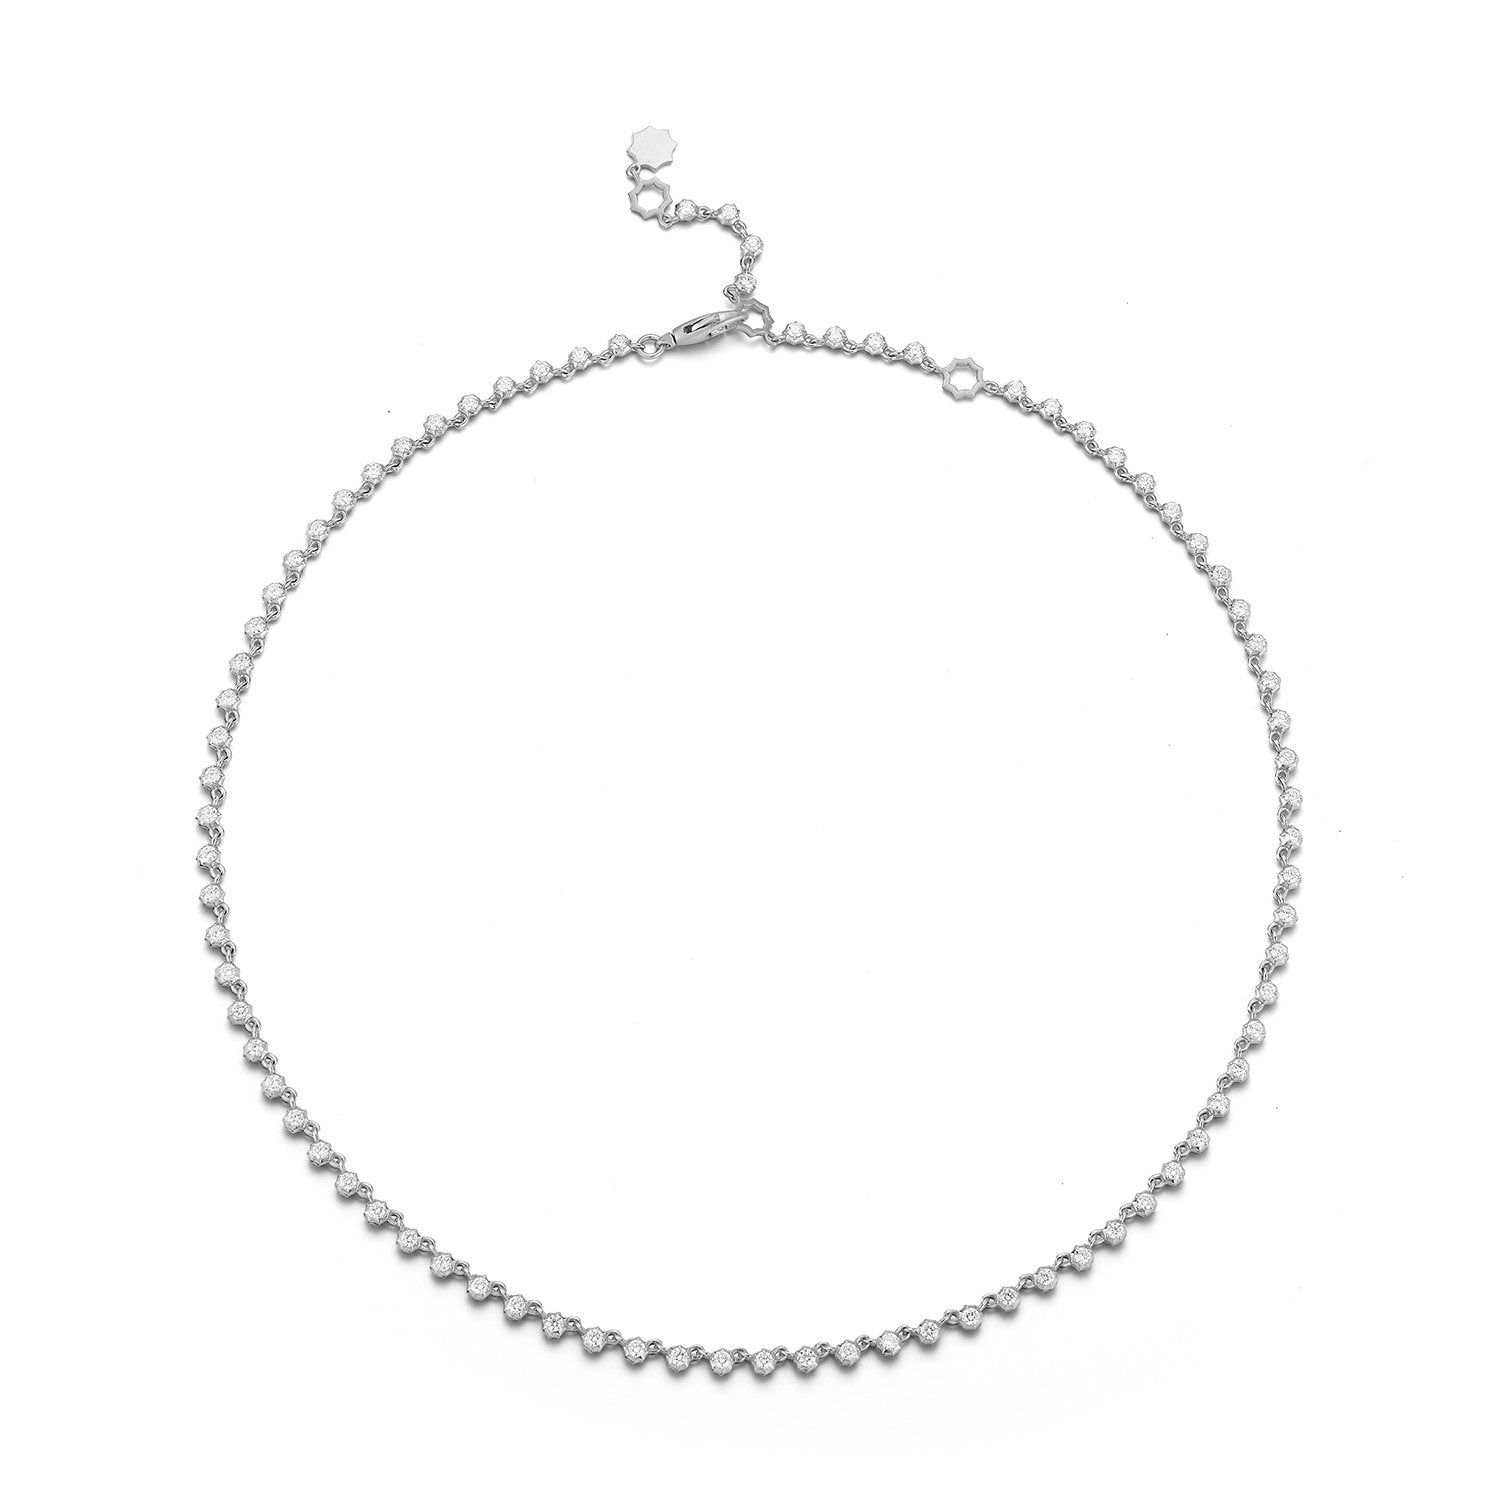 Small Sophisticate Riviera Choker in 18K White Gold